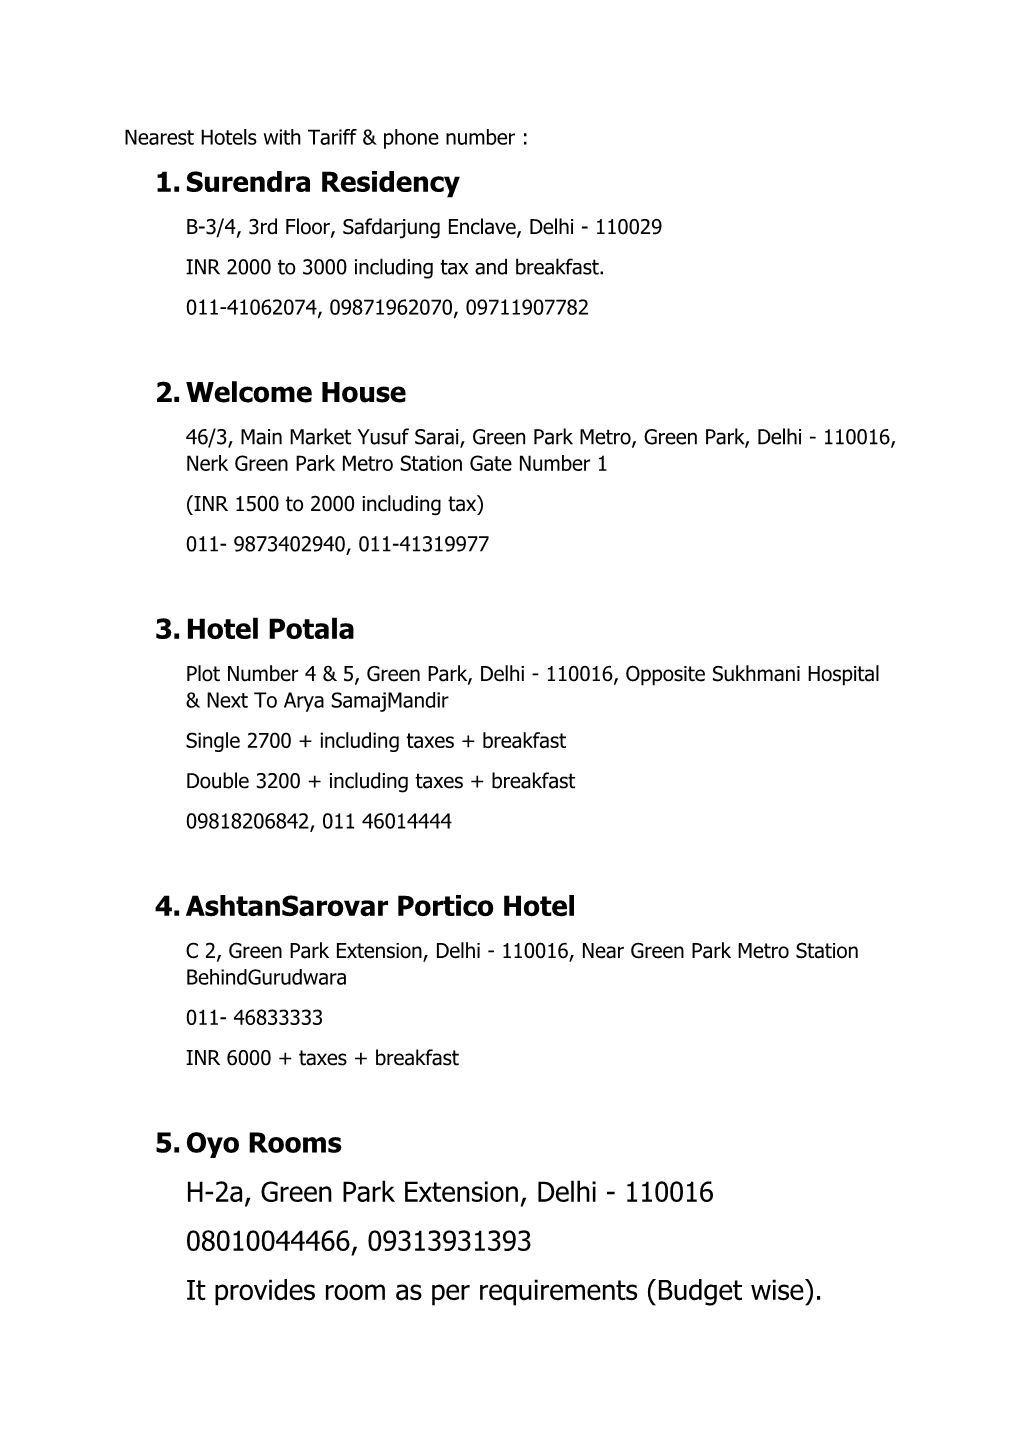 Nearest Hotels Withtariff & Phone Number